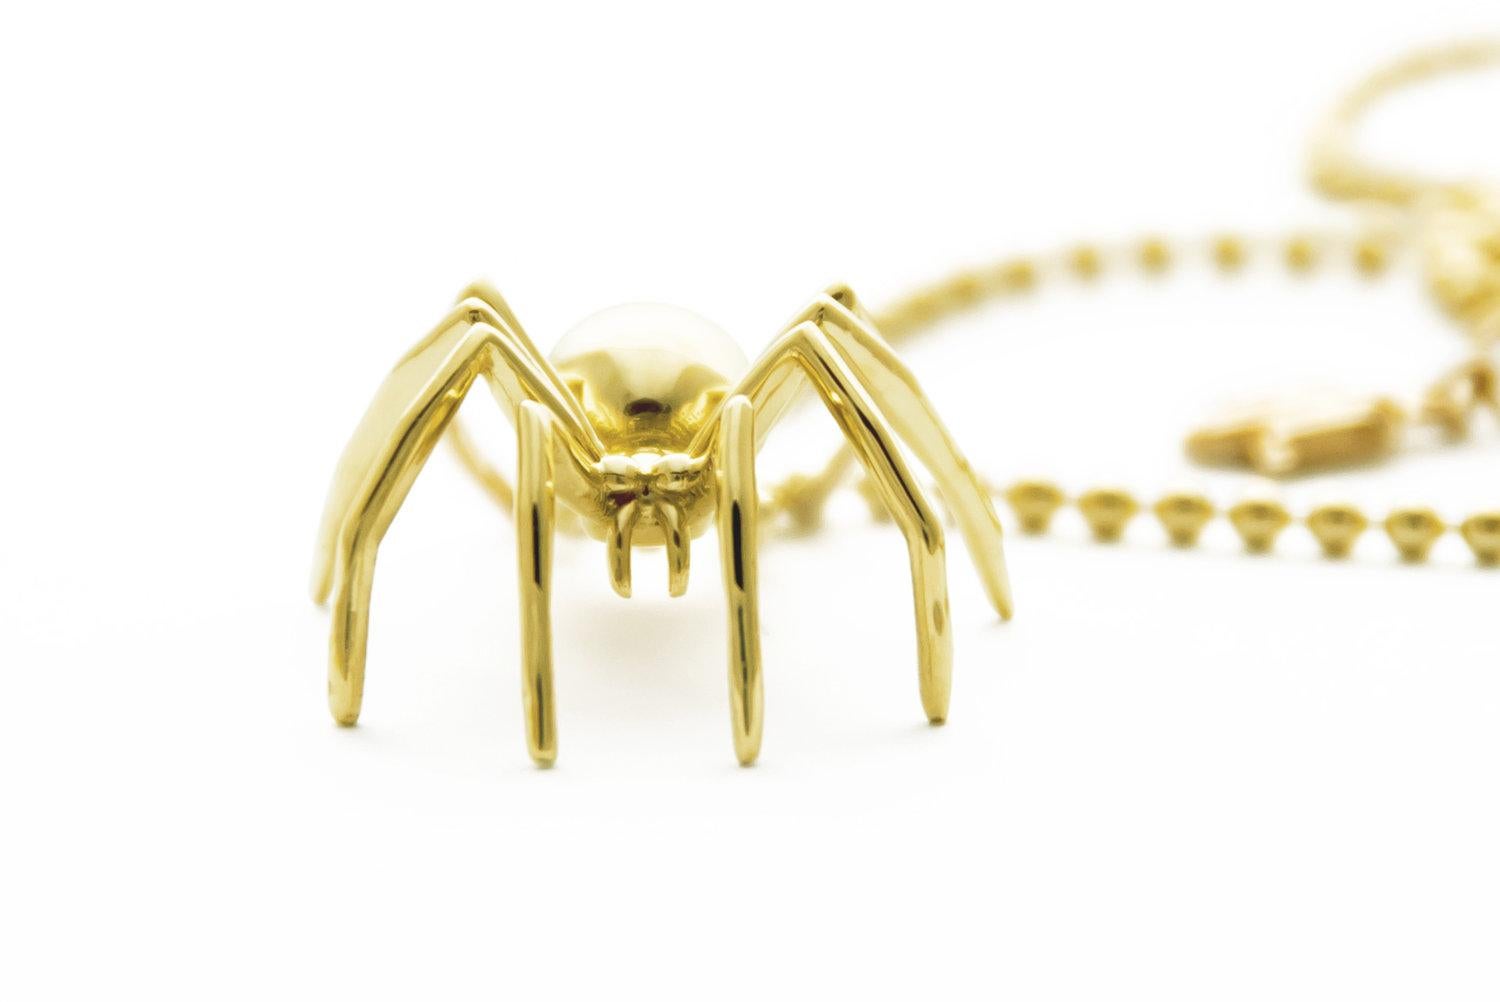 Unveil the extraordinary Medium Spider Pendant Solid Yellow Gold, a stunning embodiment of creativity and self-determination. Symbolizing the mastery of its own destiny, the spider has long captivated our imagination as a potent representation of